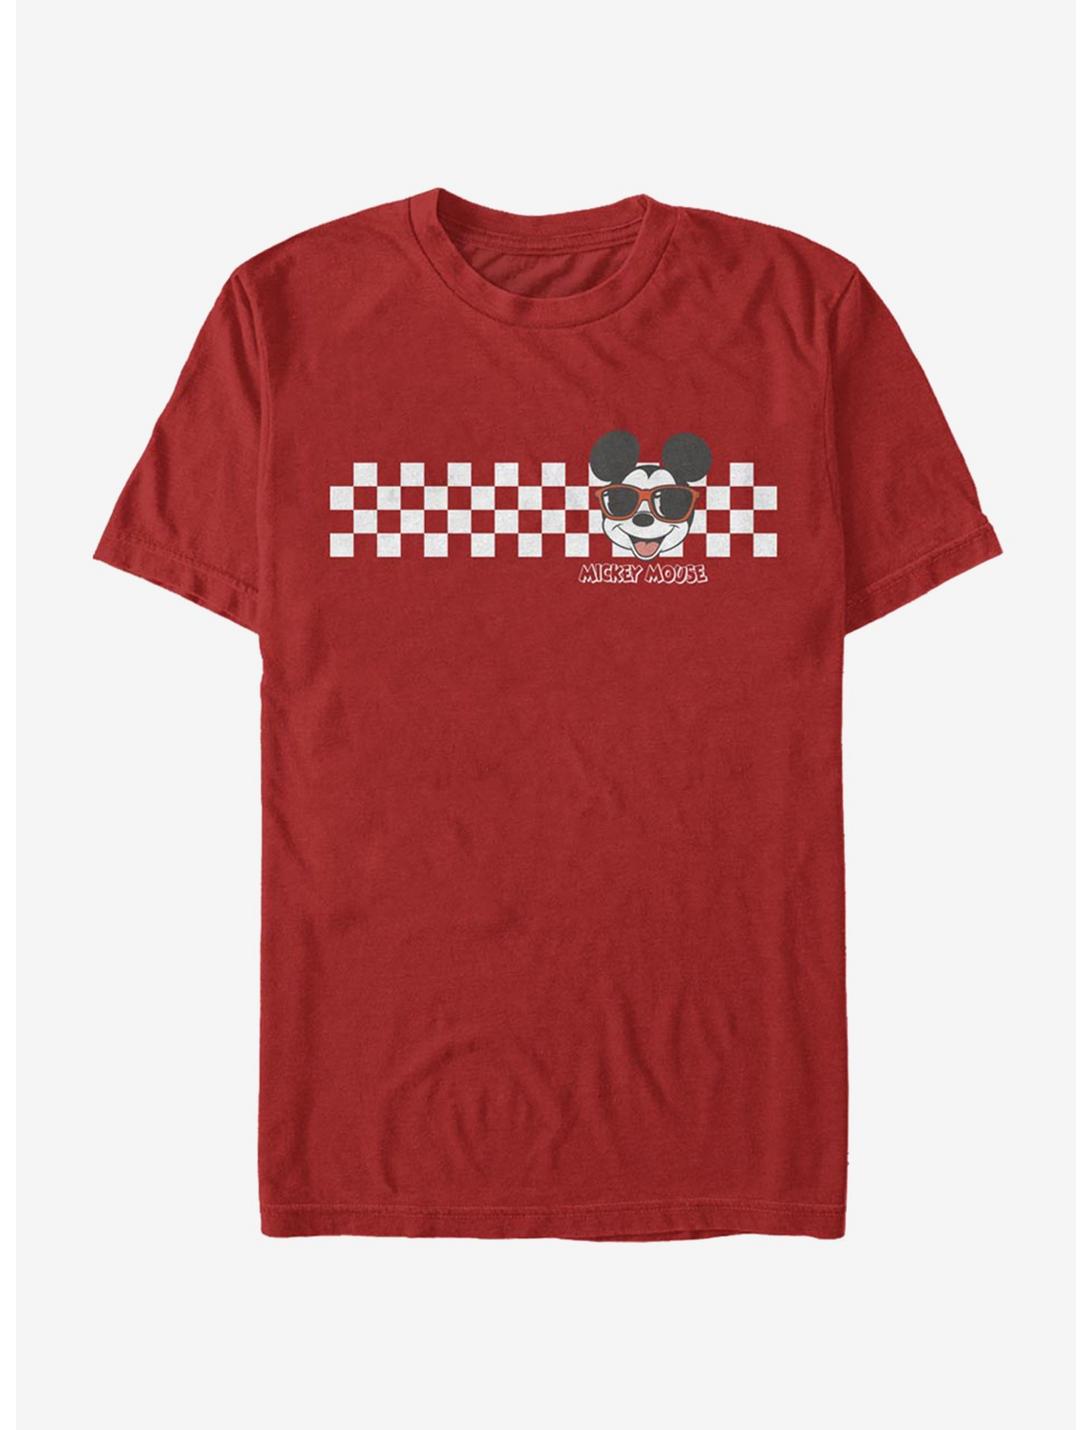 Disney Mickey Mouse Checkers T-Shirt, RED, hi-res